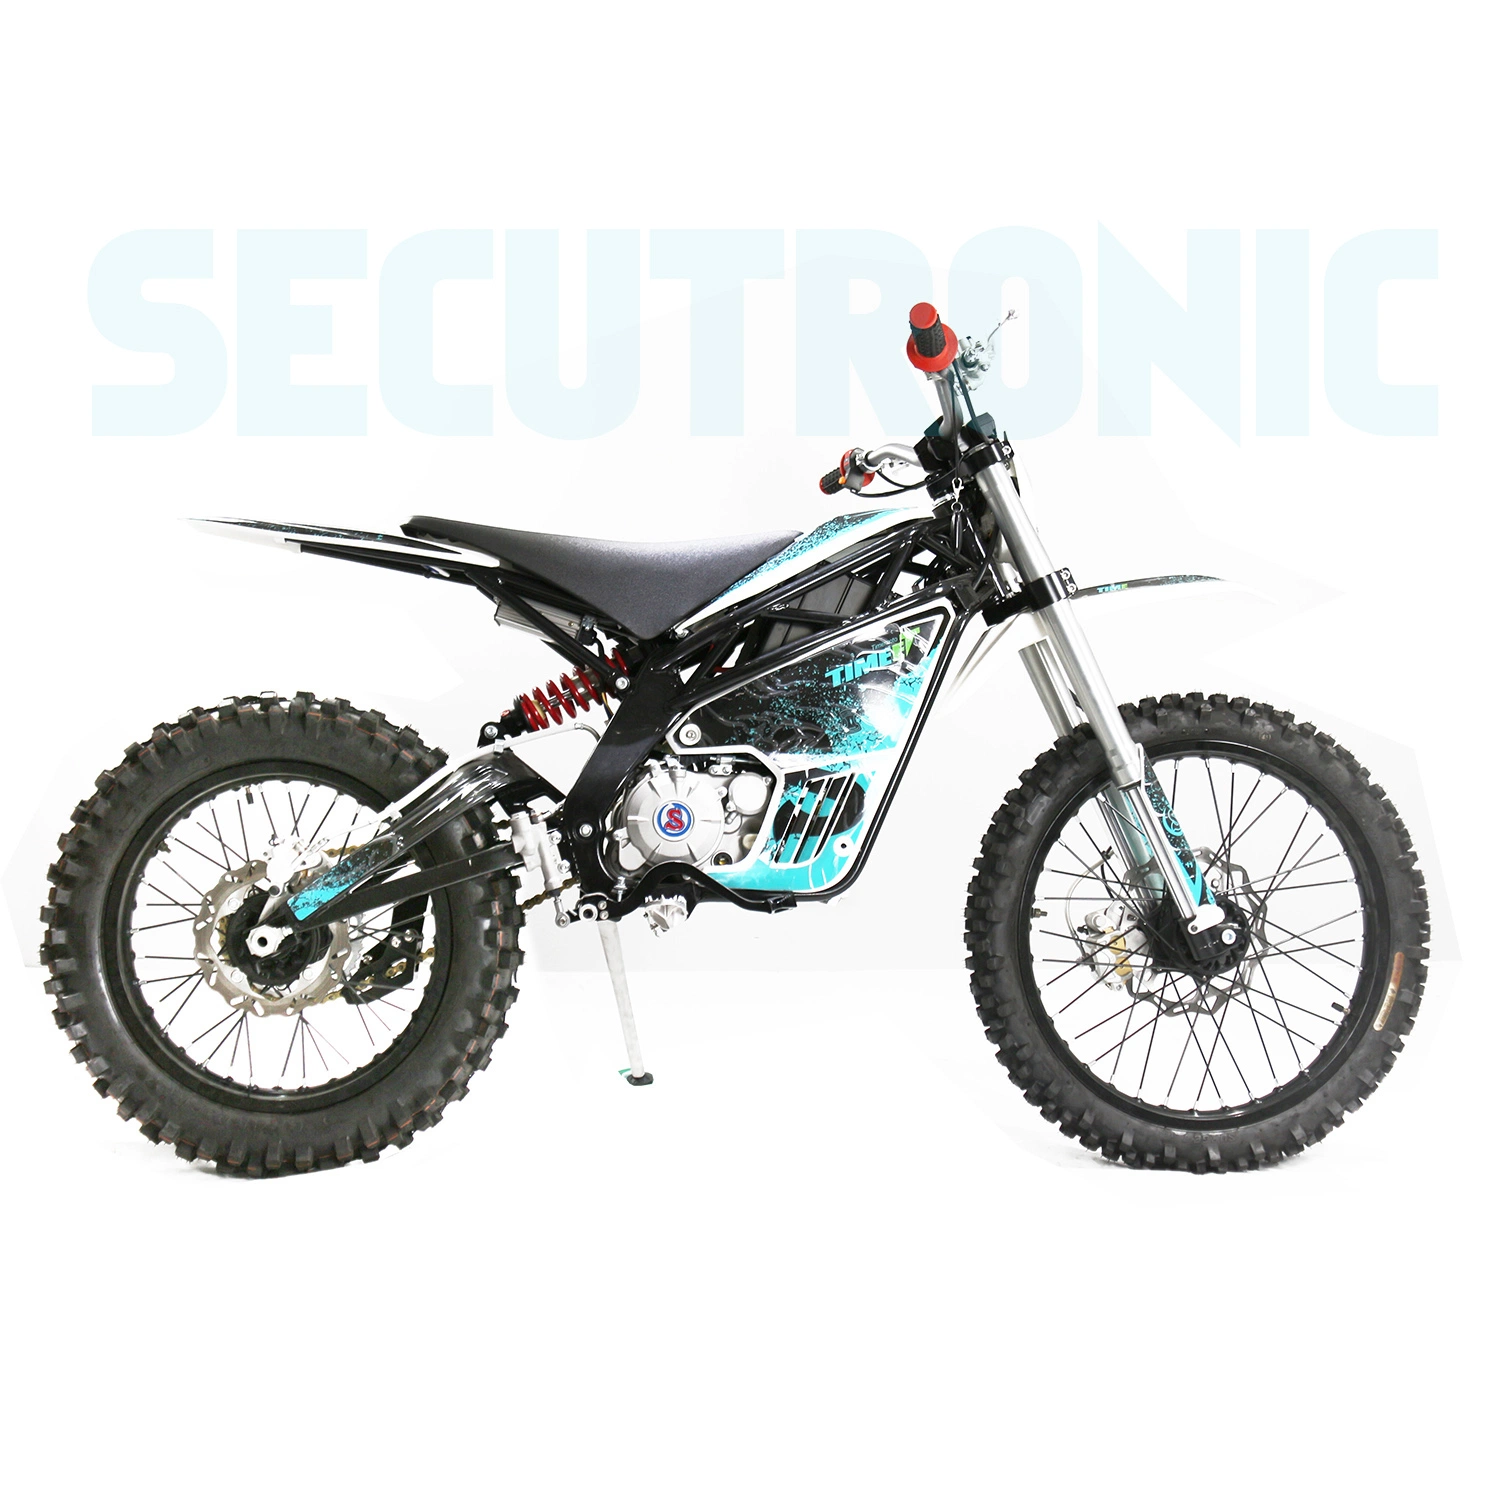 New 12000W Powerful Time Trail Ebike Offroad Enduro off-Road Motorcycle Other Dirt Electric Bike E Bicycle for Sale